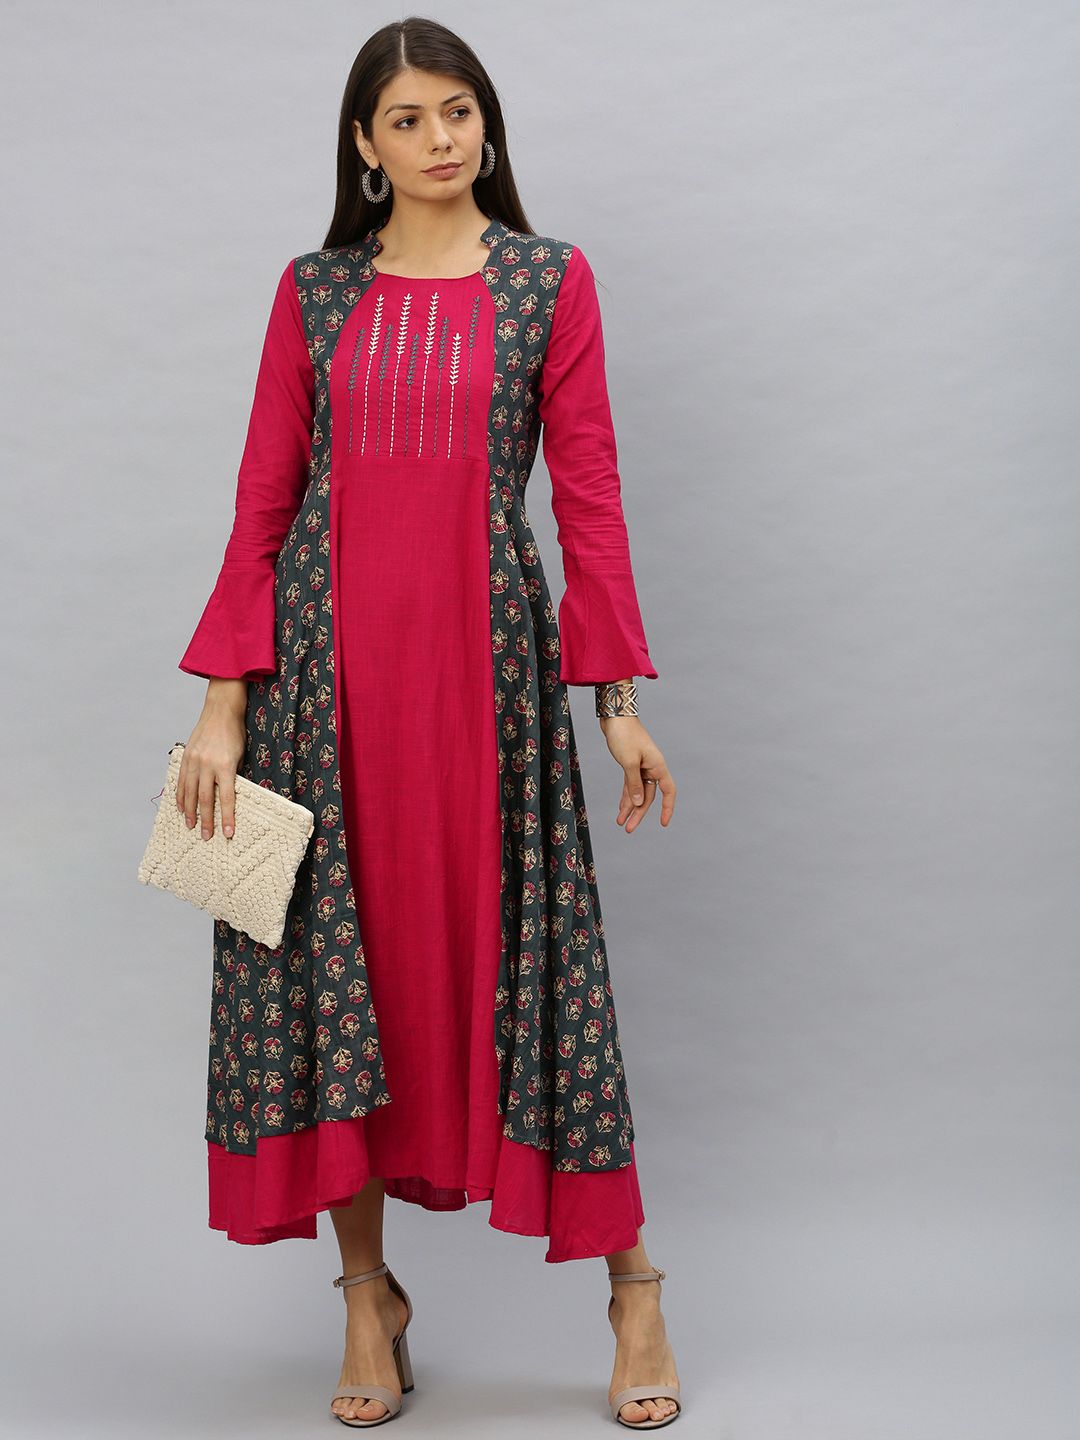 YASH GALLERY Women Grey & Pink Embroidered Layered Fit and Flare Dress Price in India